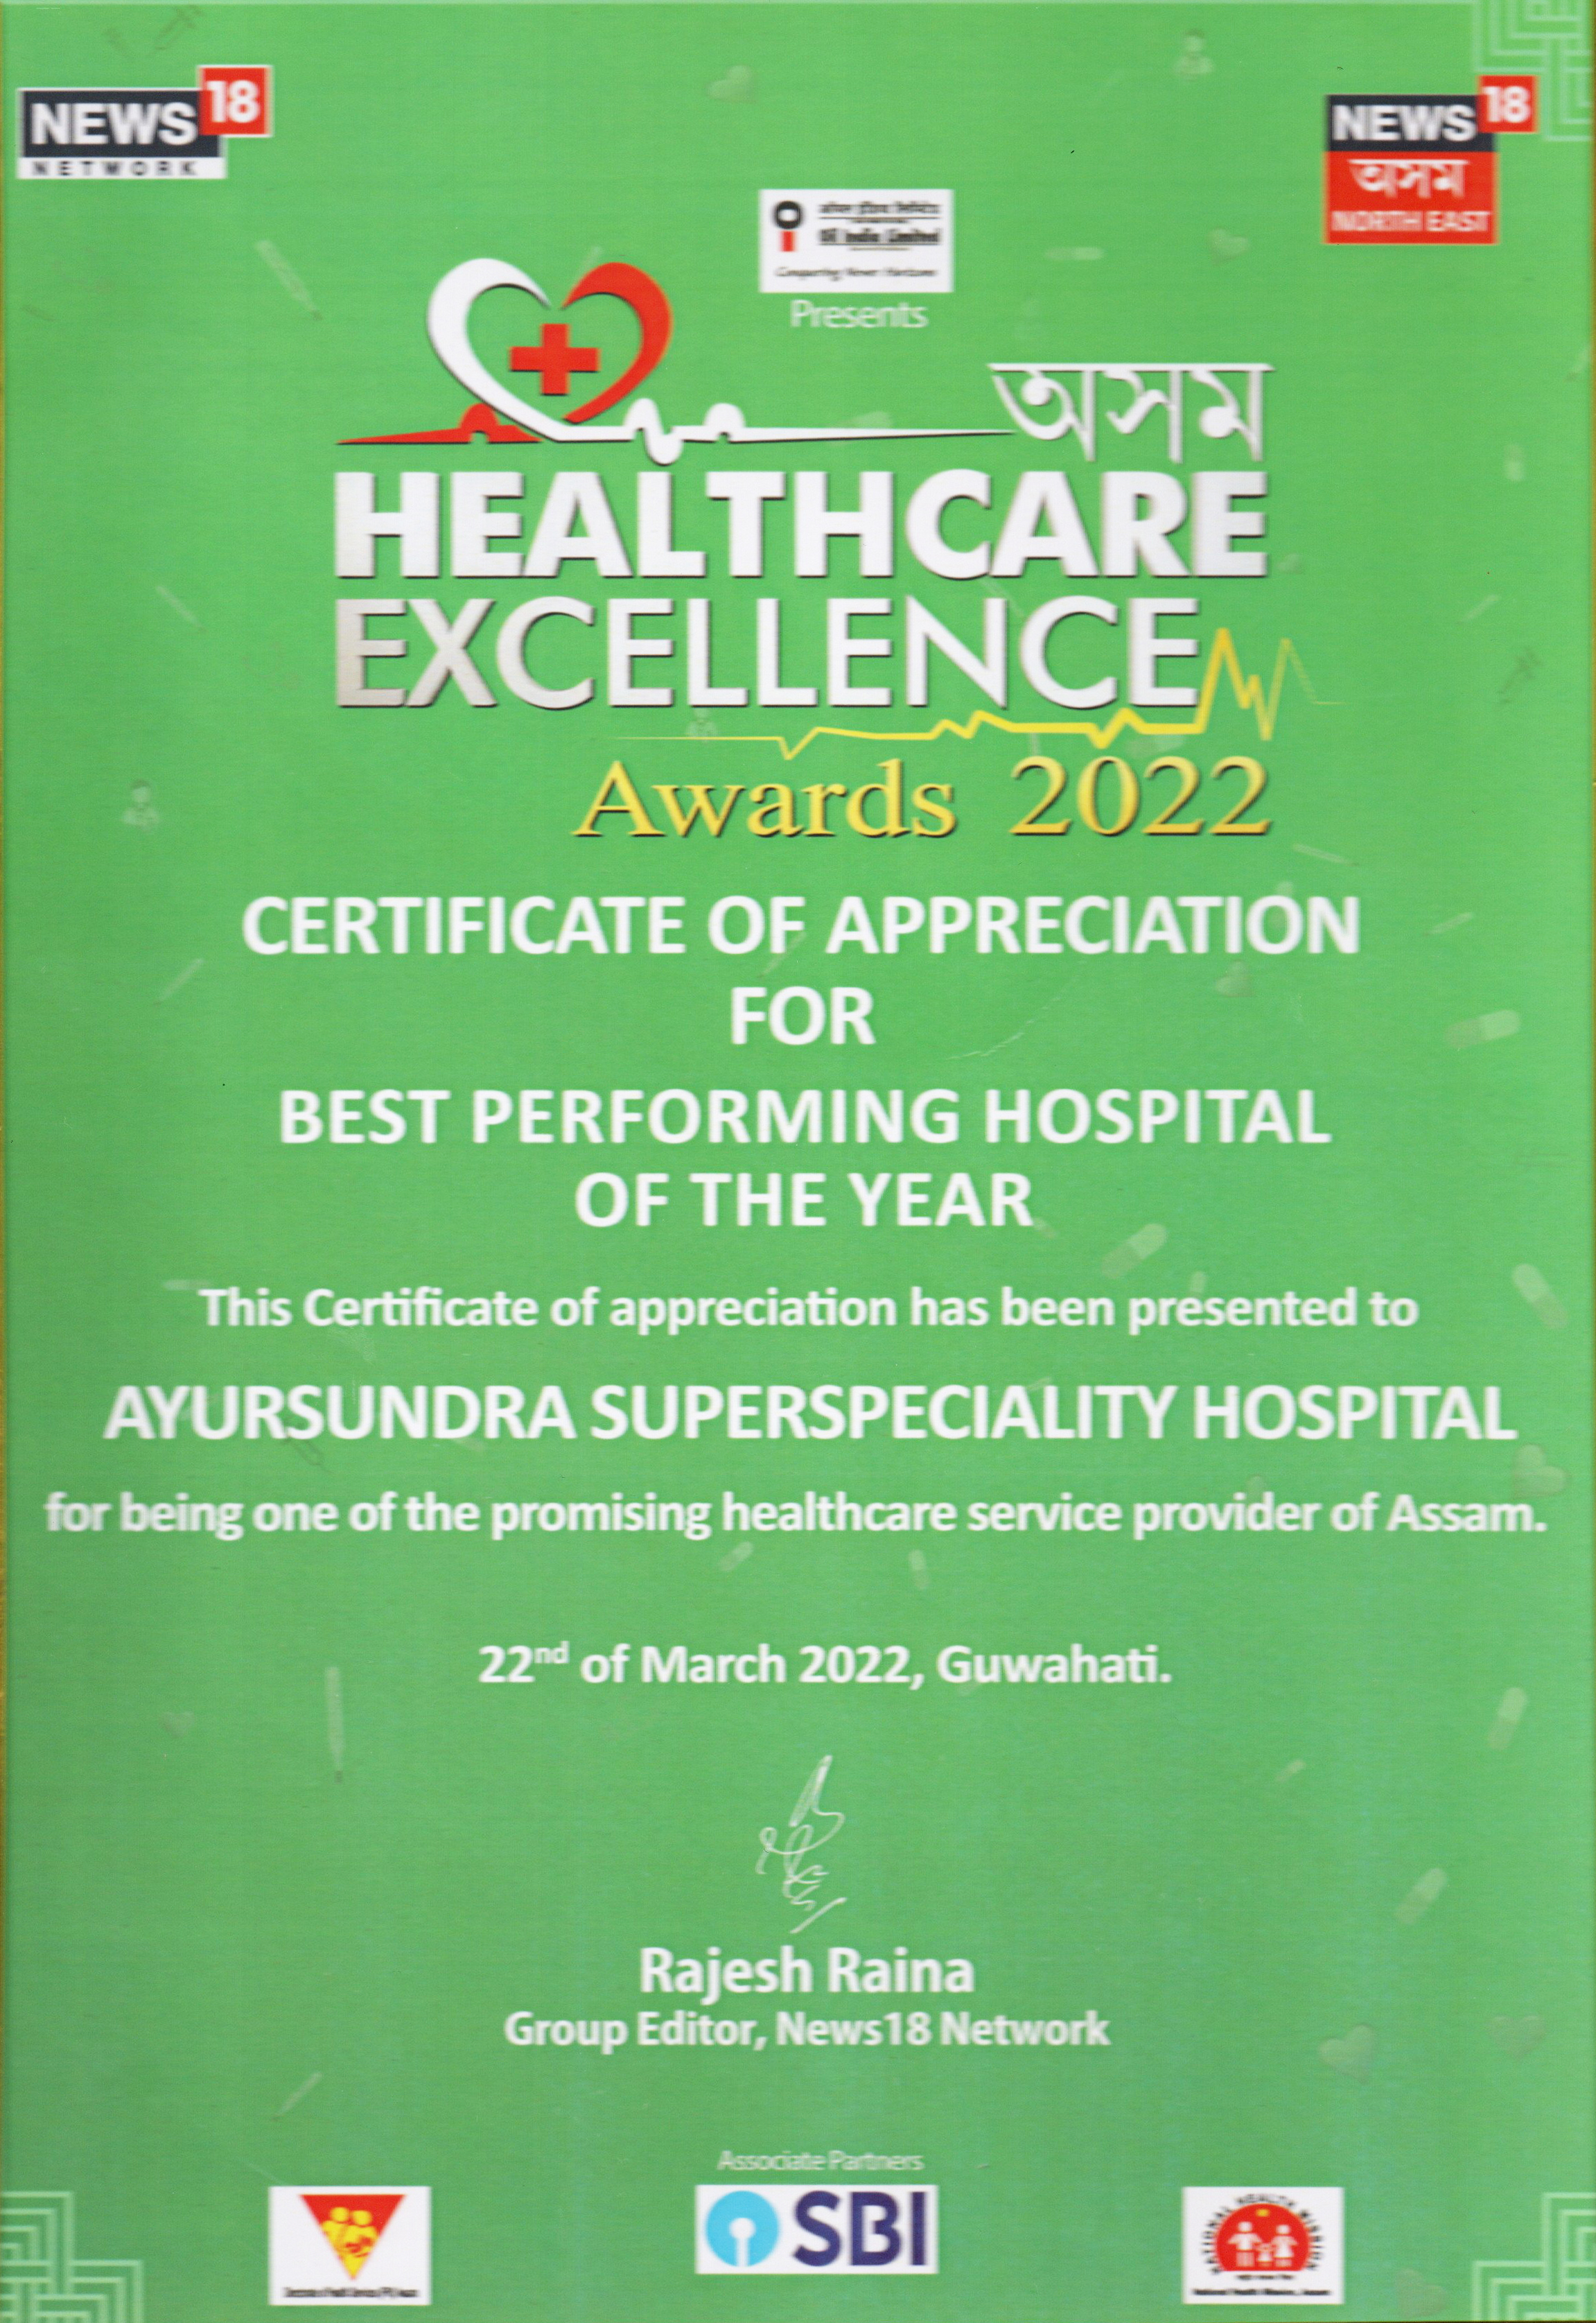 Ayursundra Super Speciality Hospital has been assessed and found in compliance with the requirements of ISO 9001:2015